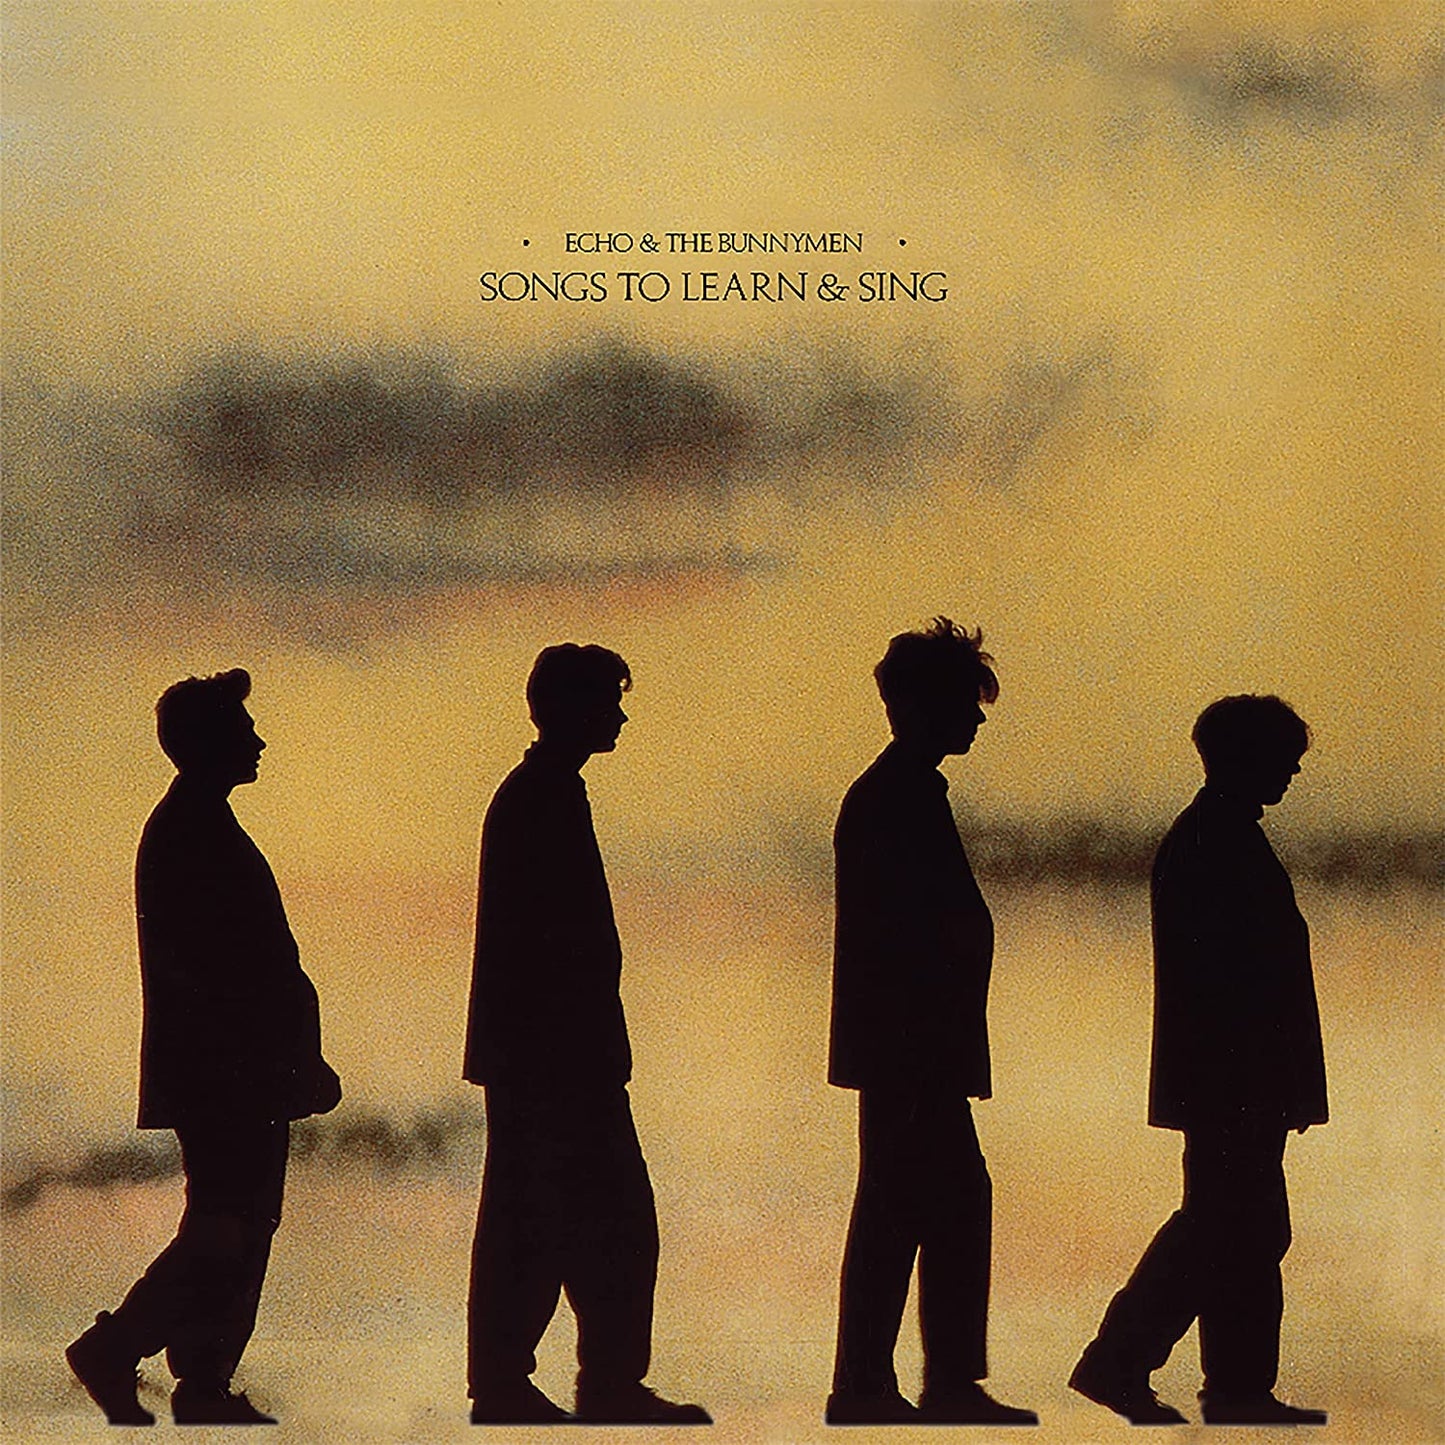 LP - Echo And The Bunnymen - Songs to Learn & Sing